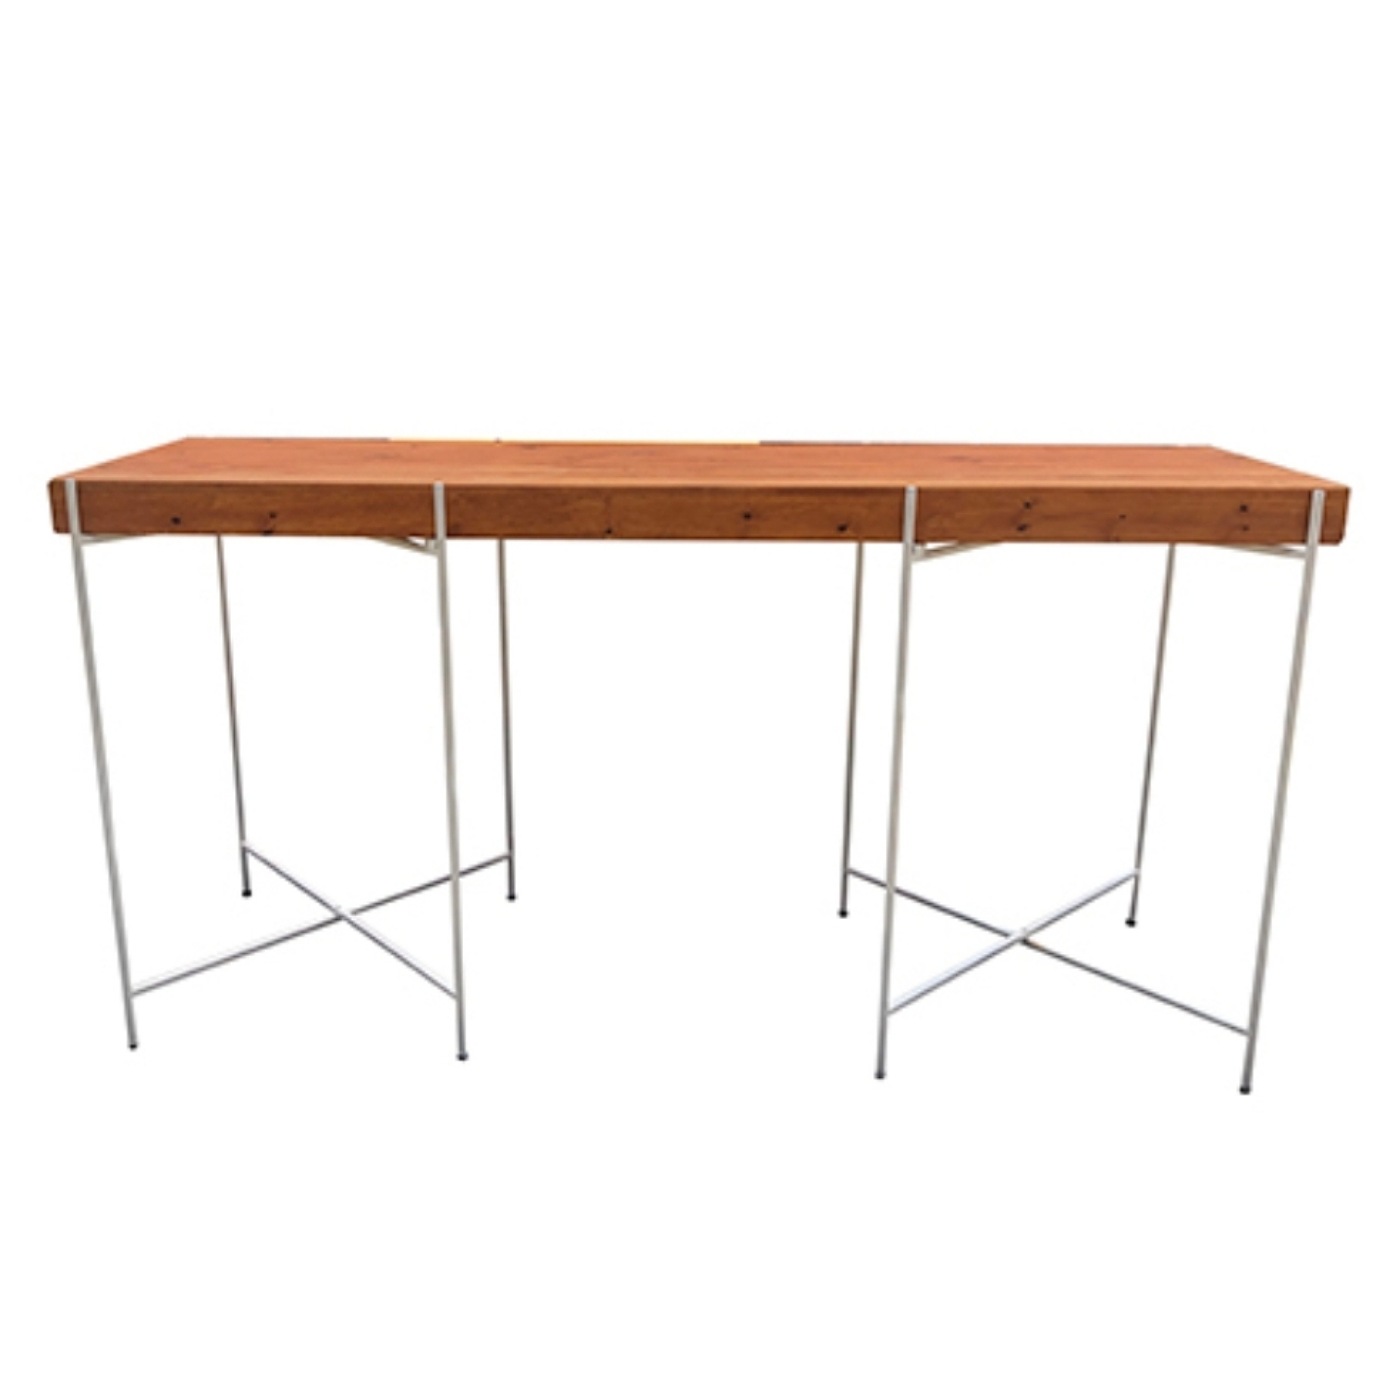 Rectangular Cocktail Table With Wooden Top And White Steel Crossed Legs.